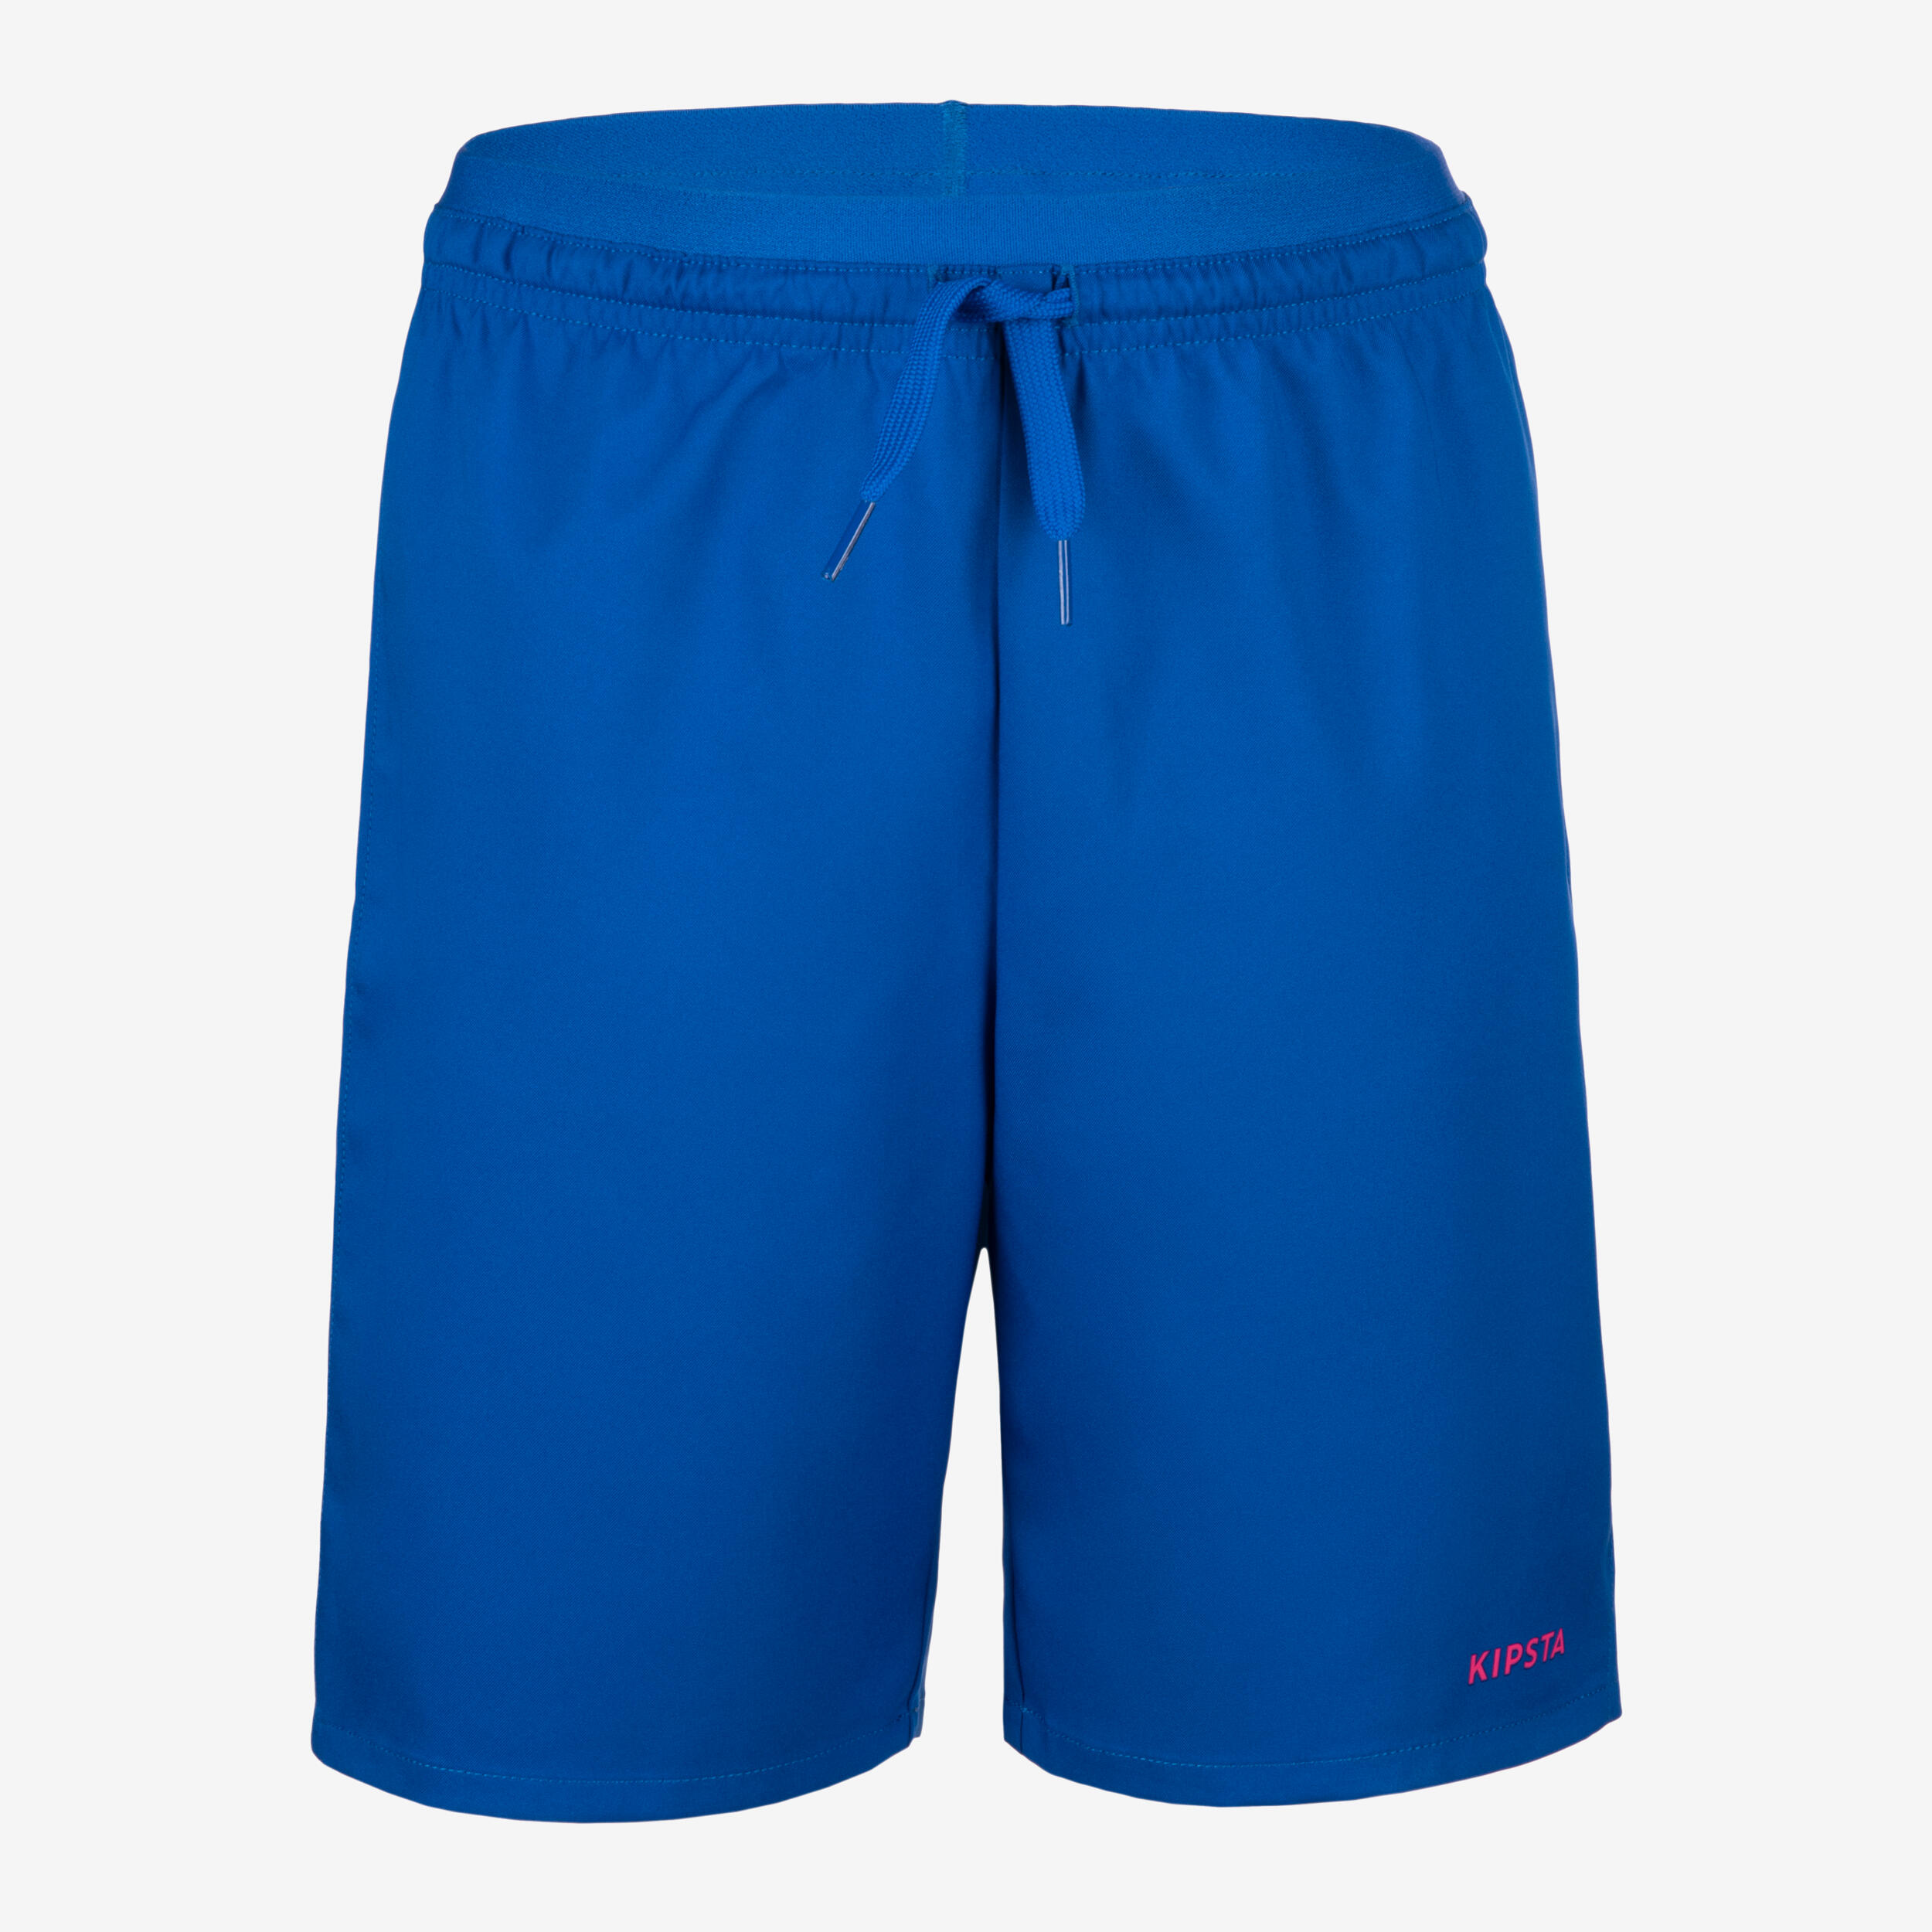 Anti Chafing Shorts Lightweight - Electric Royal Blue